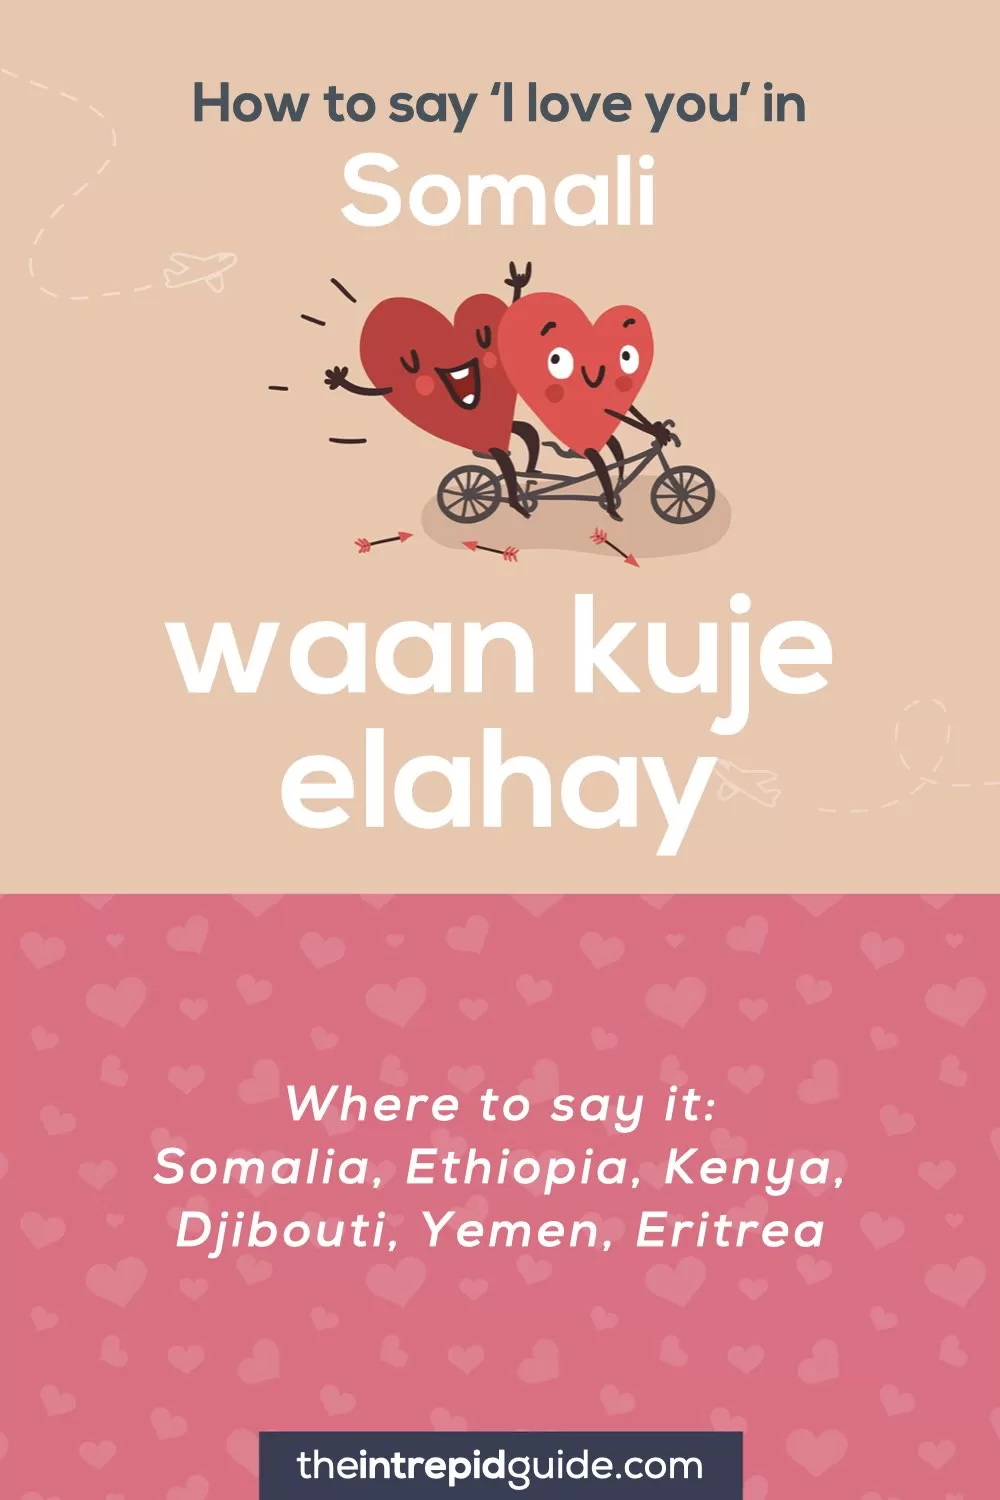 How to say I love you in different languages - Somali - waan kuje elahay